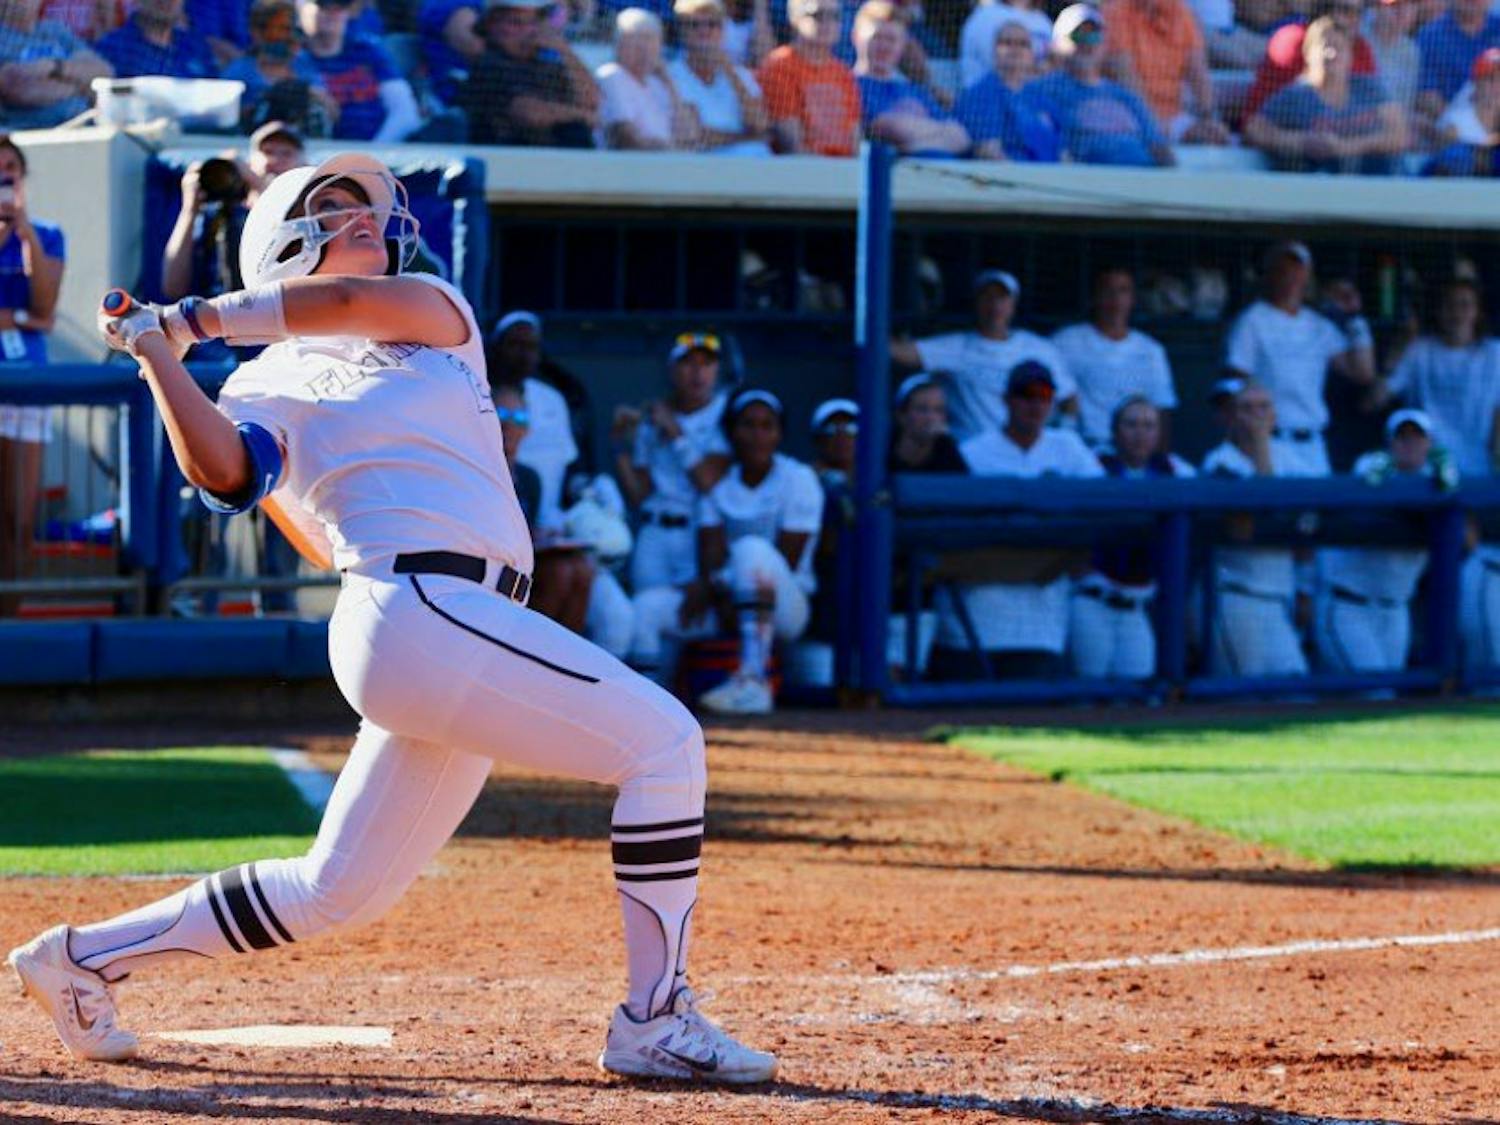 First baseman Kayli Kvistad drove in a pair of runs in Florida's 19-3 win over Florida A&amp;M on Wednesday.&nbsp;